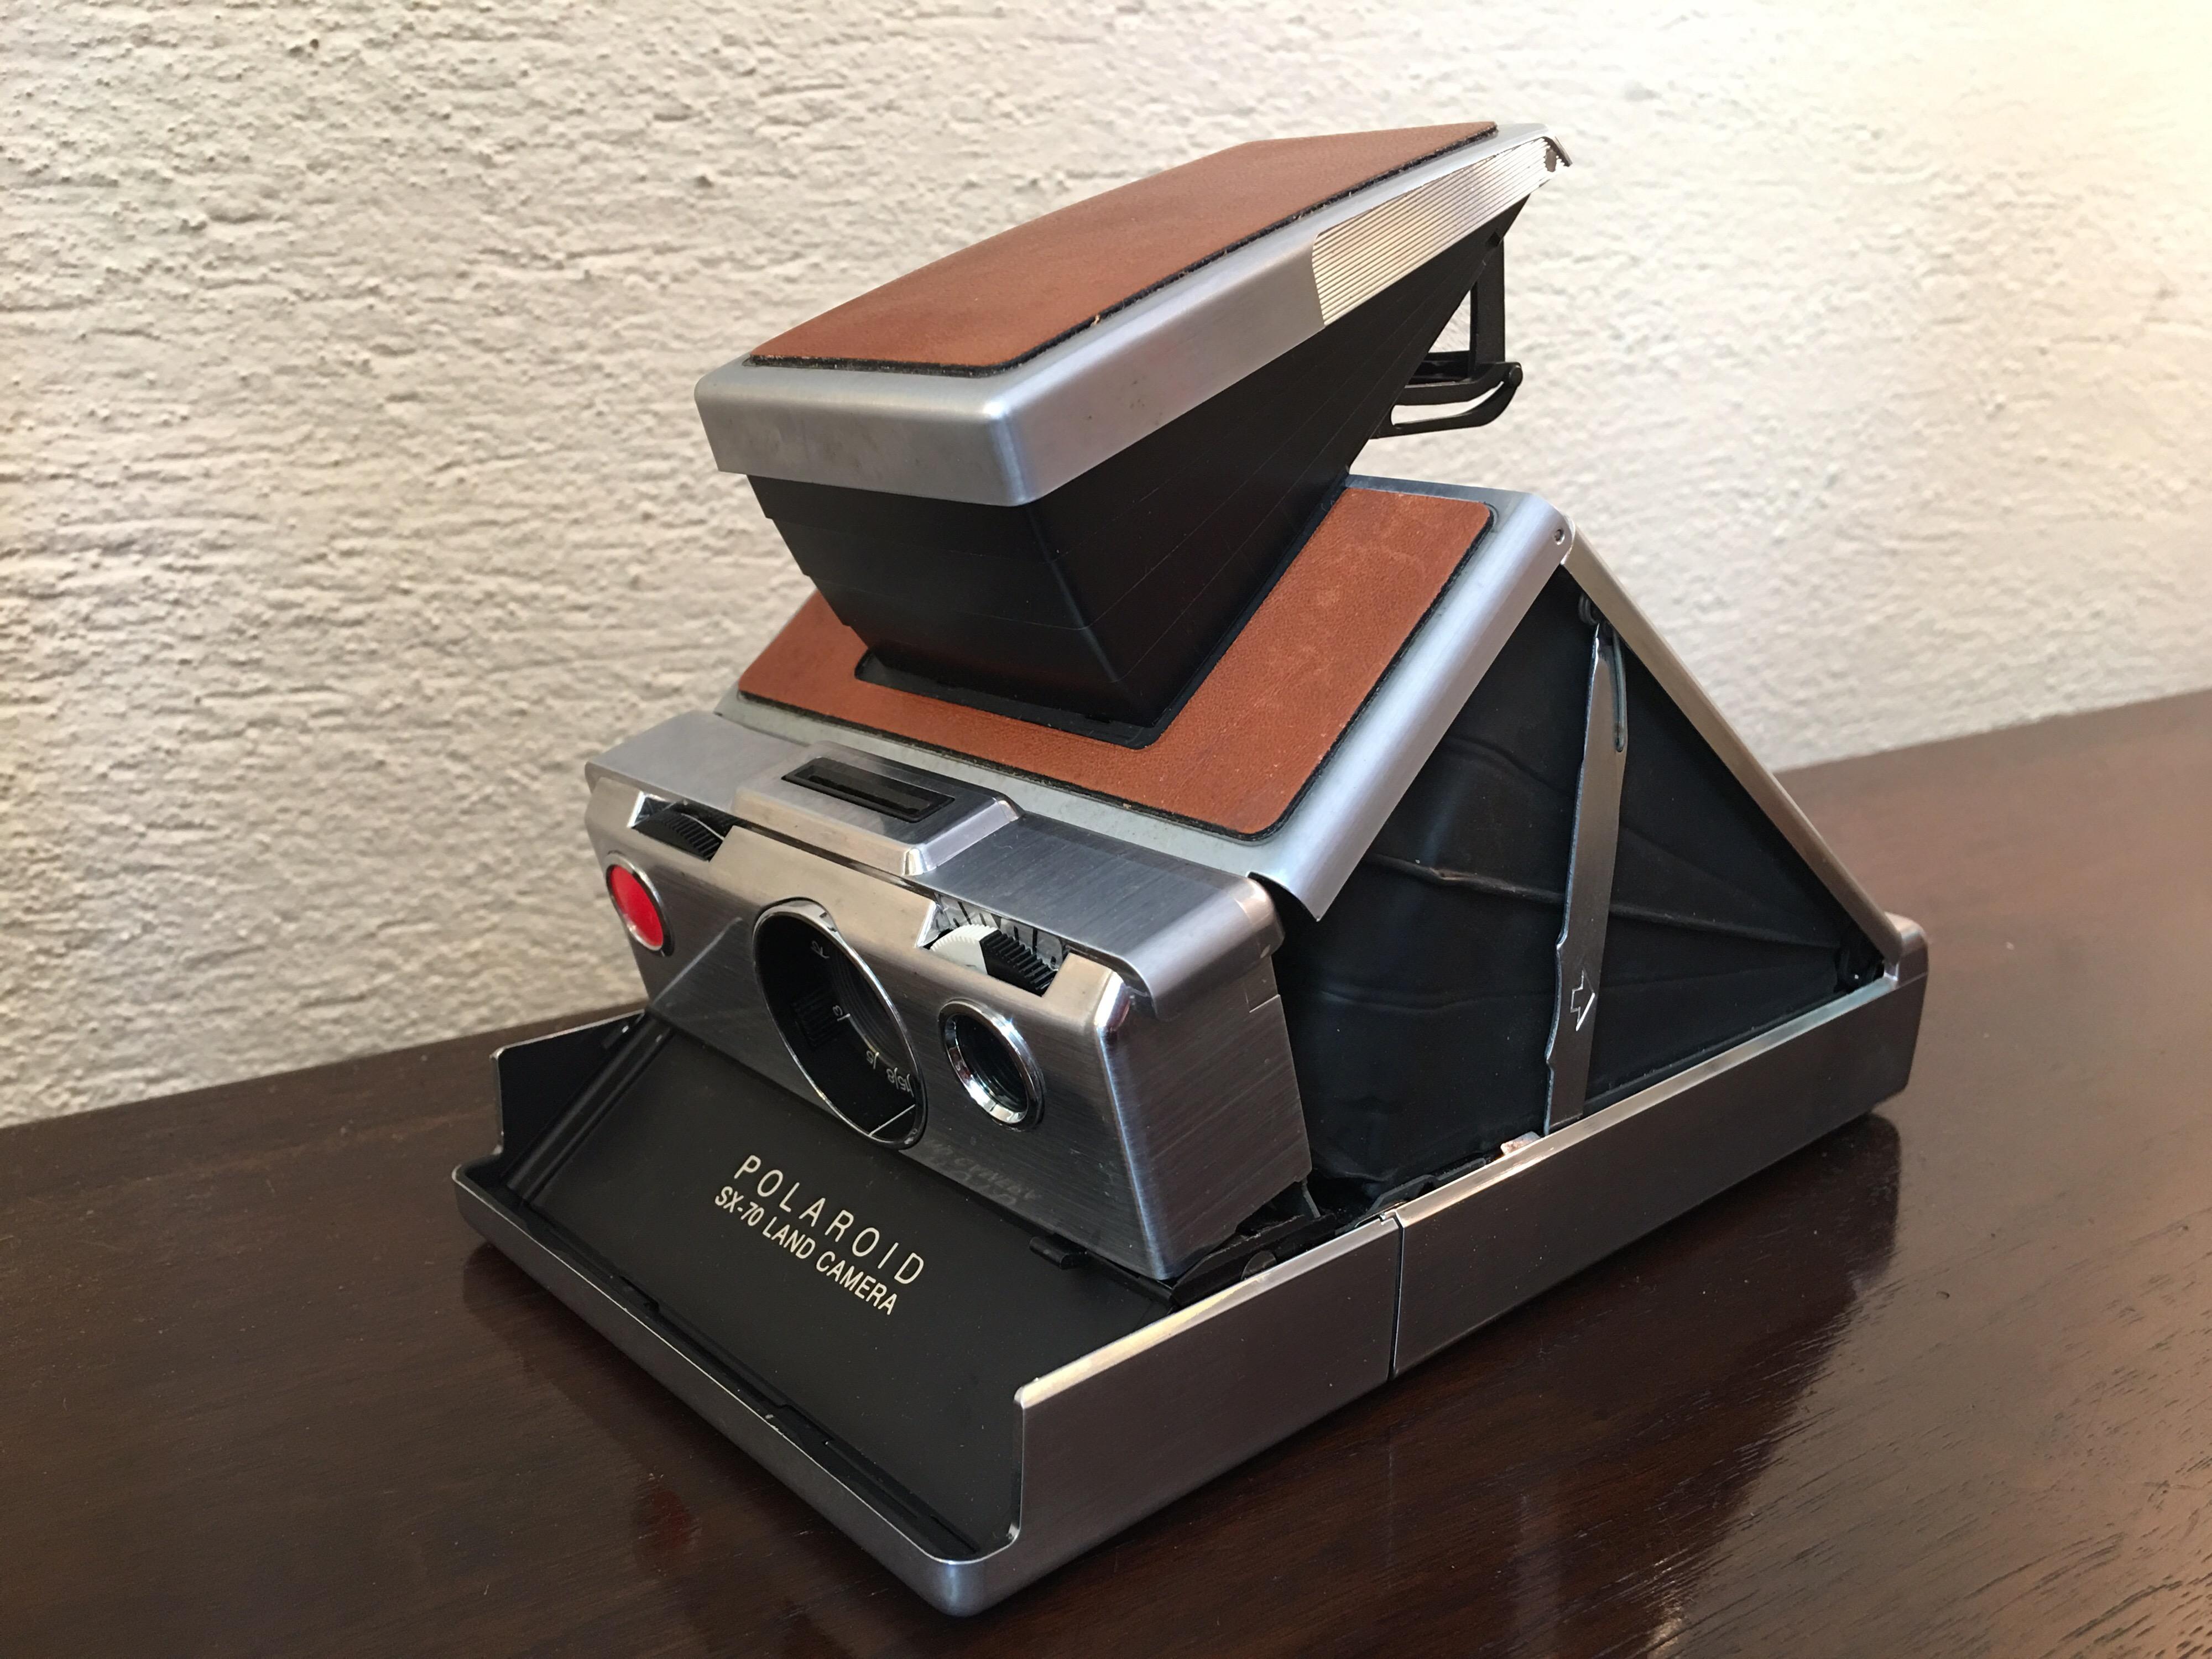 Classic land camera designed by Edwin H. Land in 1972. Folds flat and slides into leather case. Film is still available!